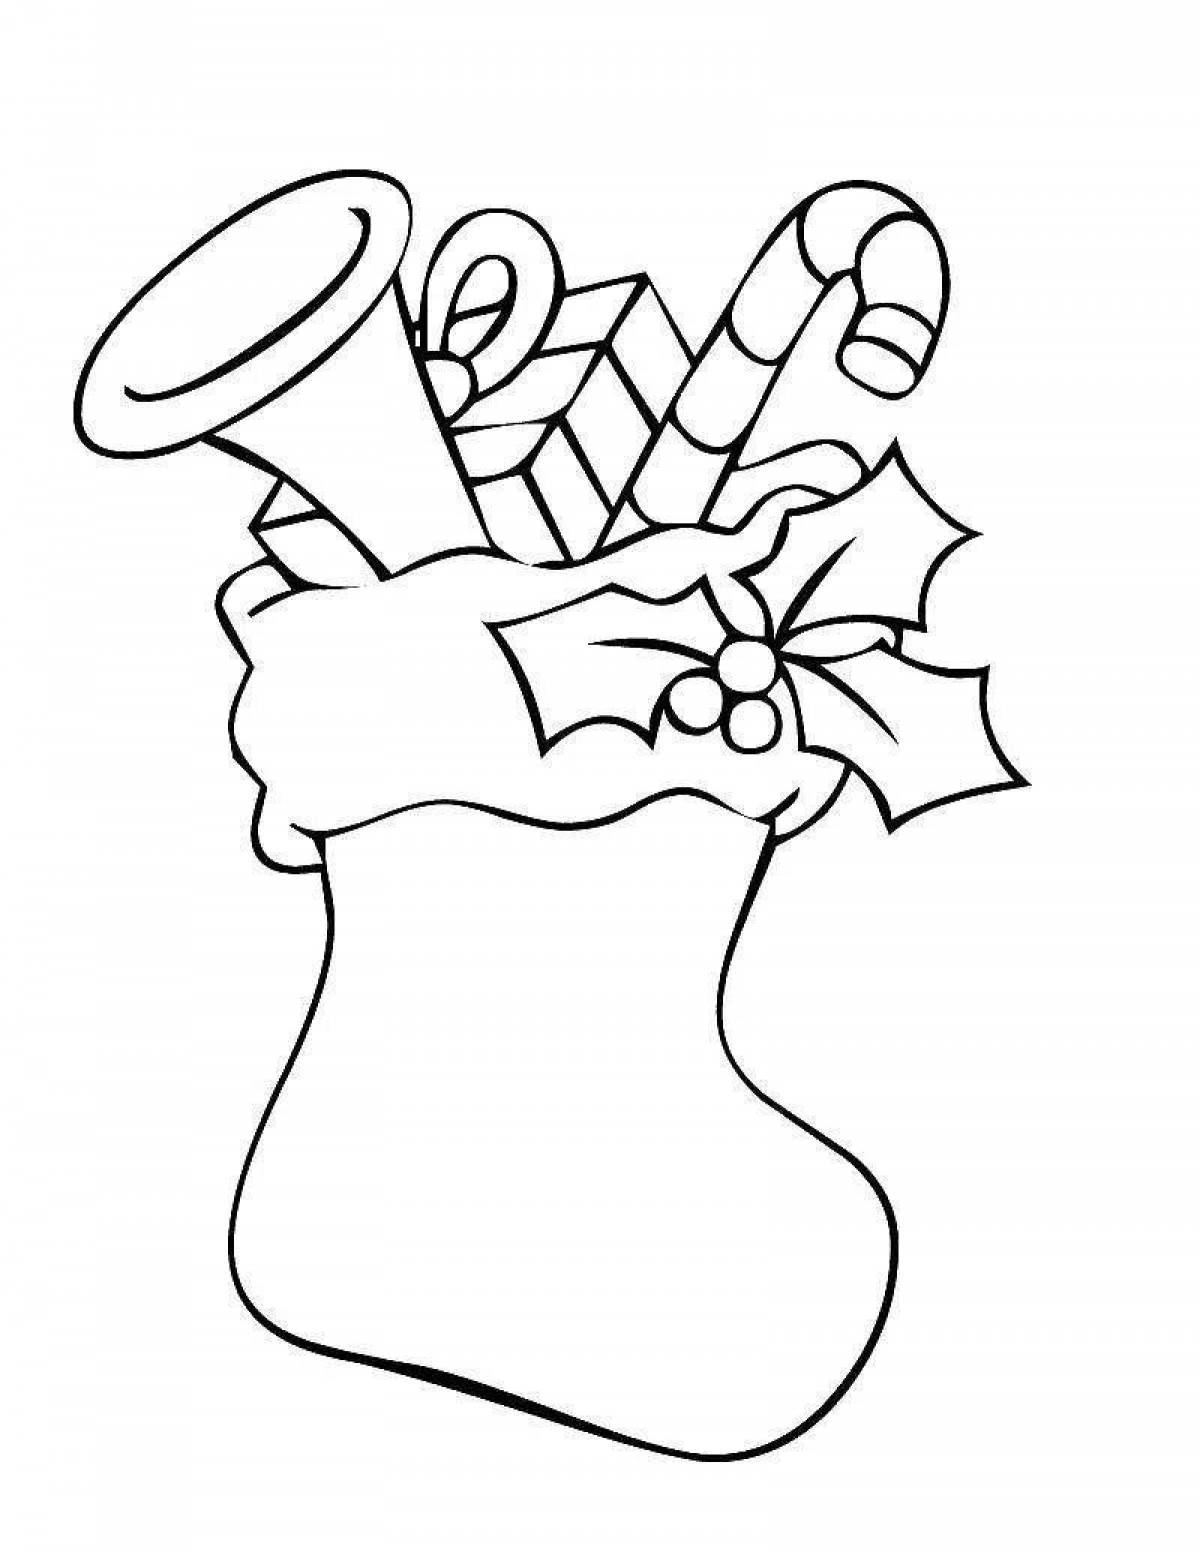 Glittering stocking coloring page